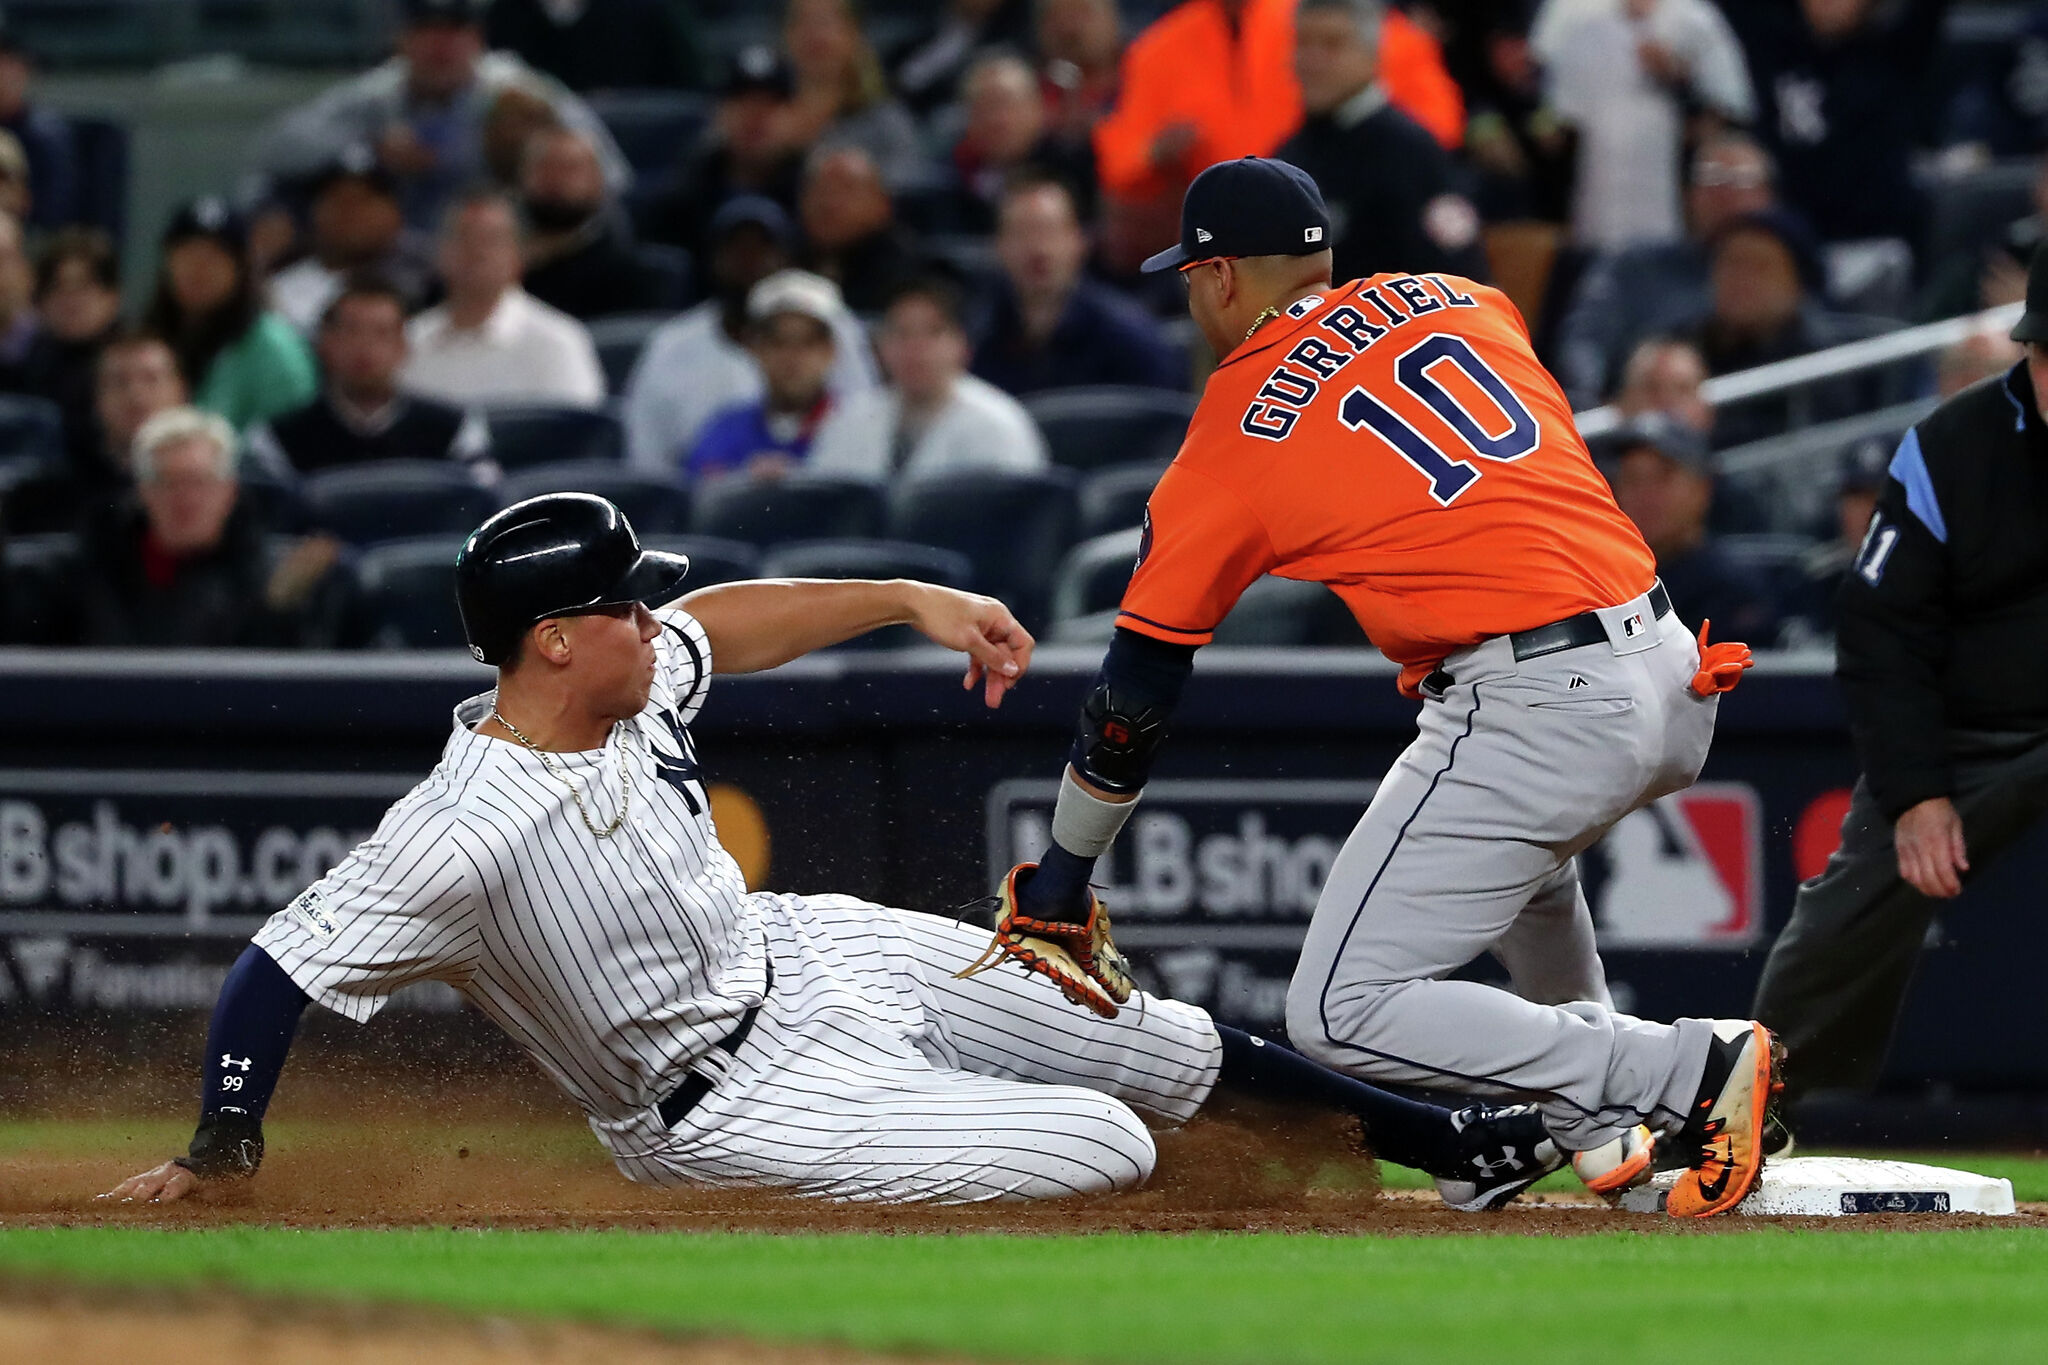 Houston Astros-New York Yankees rivalry: a brief history